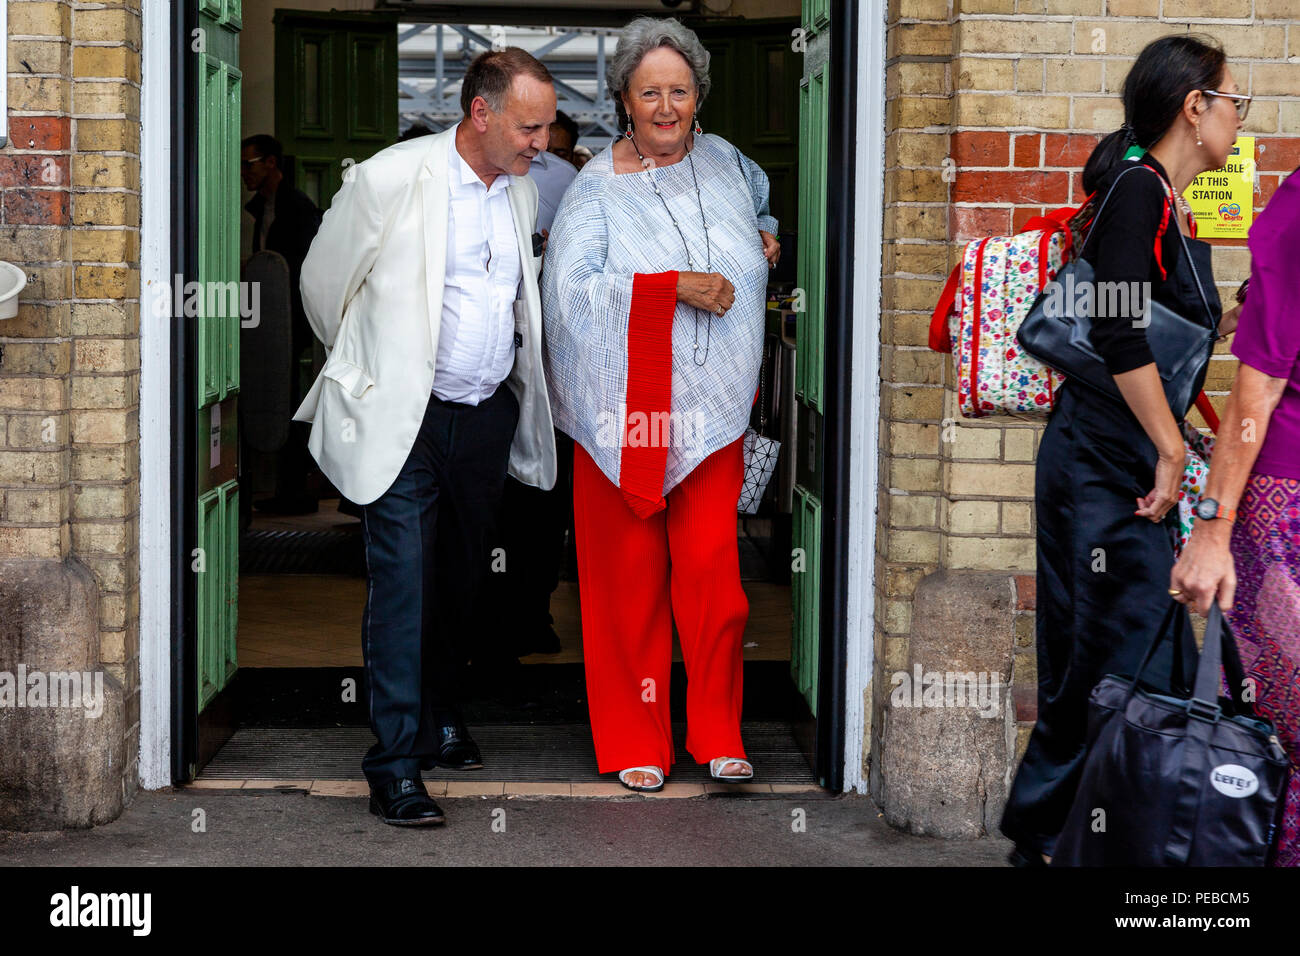 Lewes, UK. 14th August 2018. Opera fans arrive in Lewes, Sussex enroute to Glyndebourne Opera House to see a performance of Vanessa. Credit: Grant Rooney/Alamy Live News Stock Photo